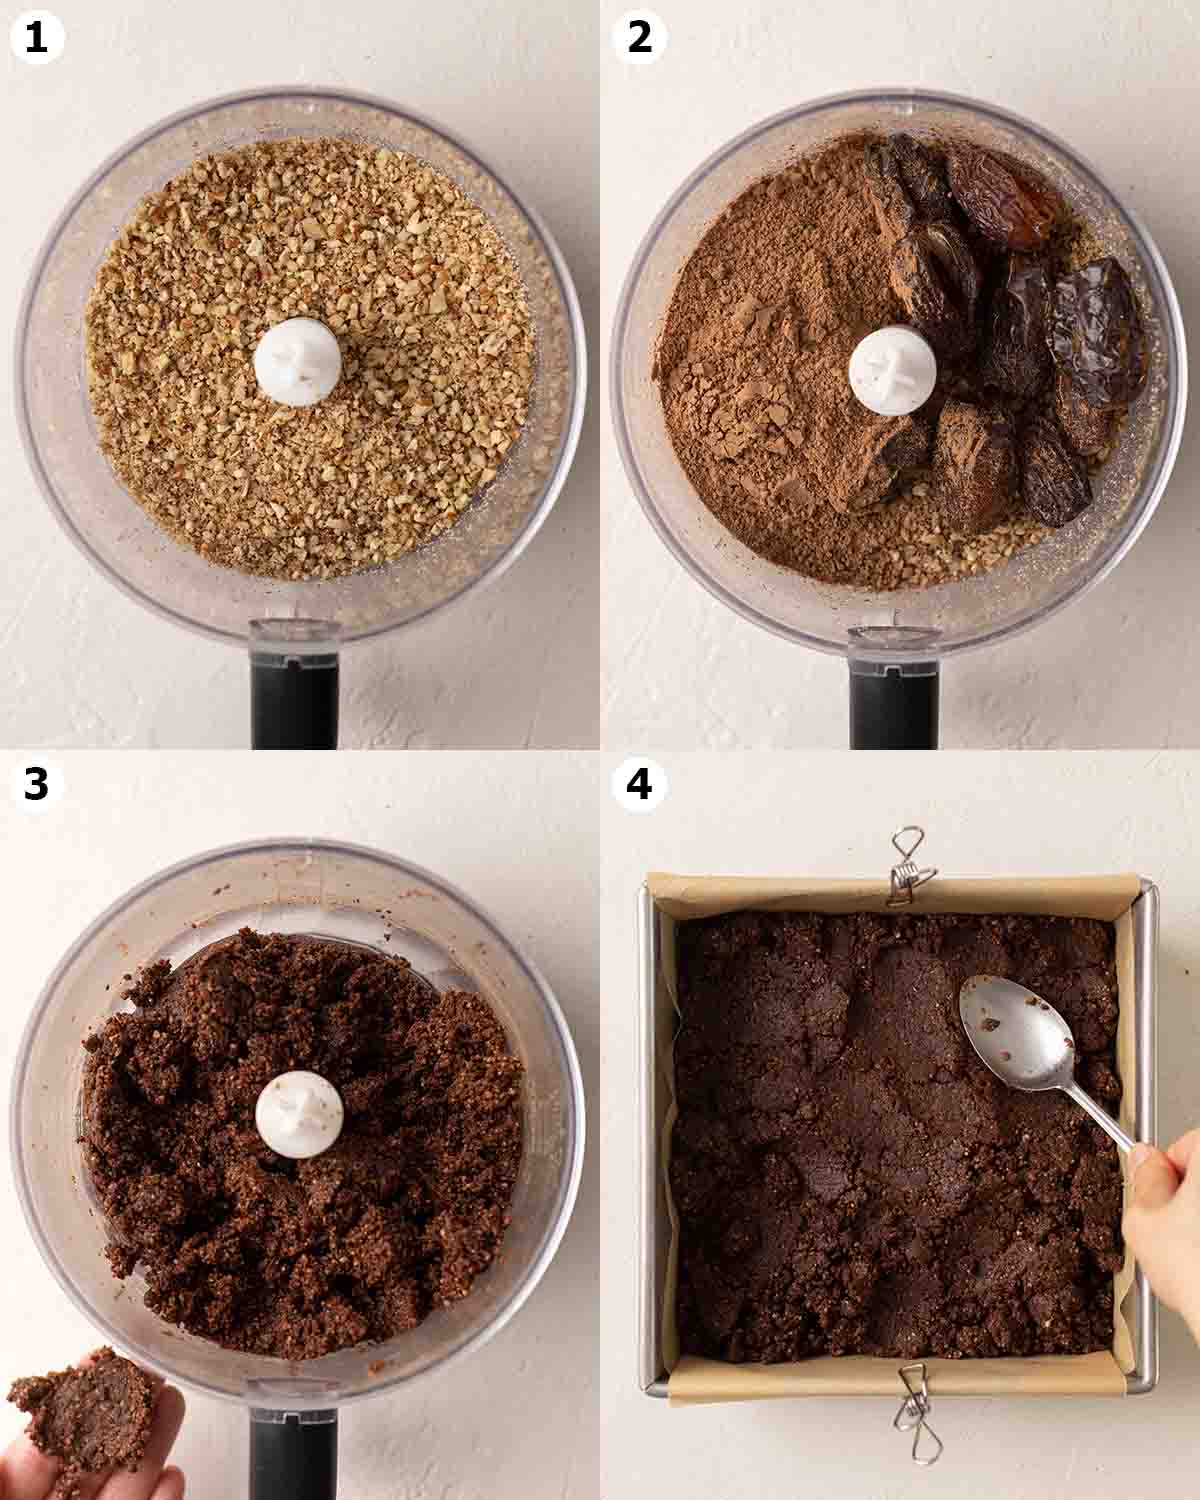 Four image collage showing how to make the brownies in a food processor and pressing raw dough into the cake pan.